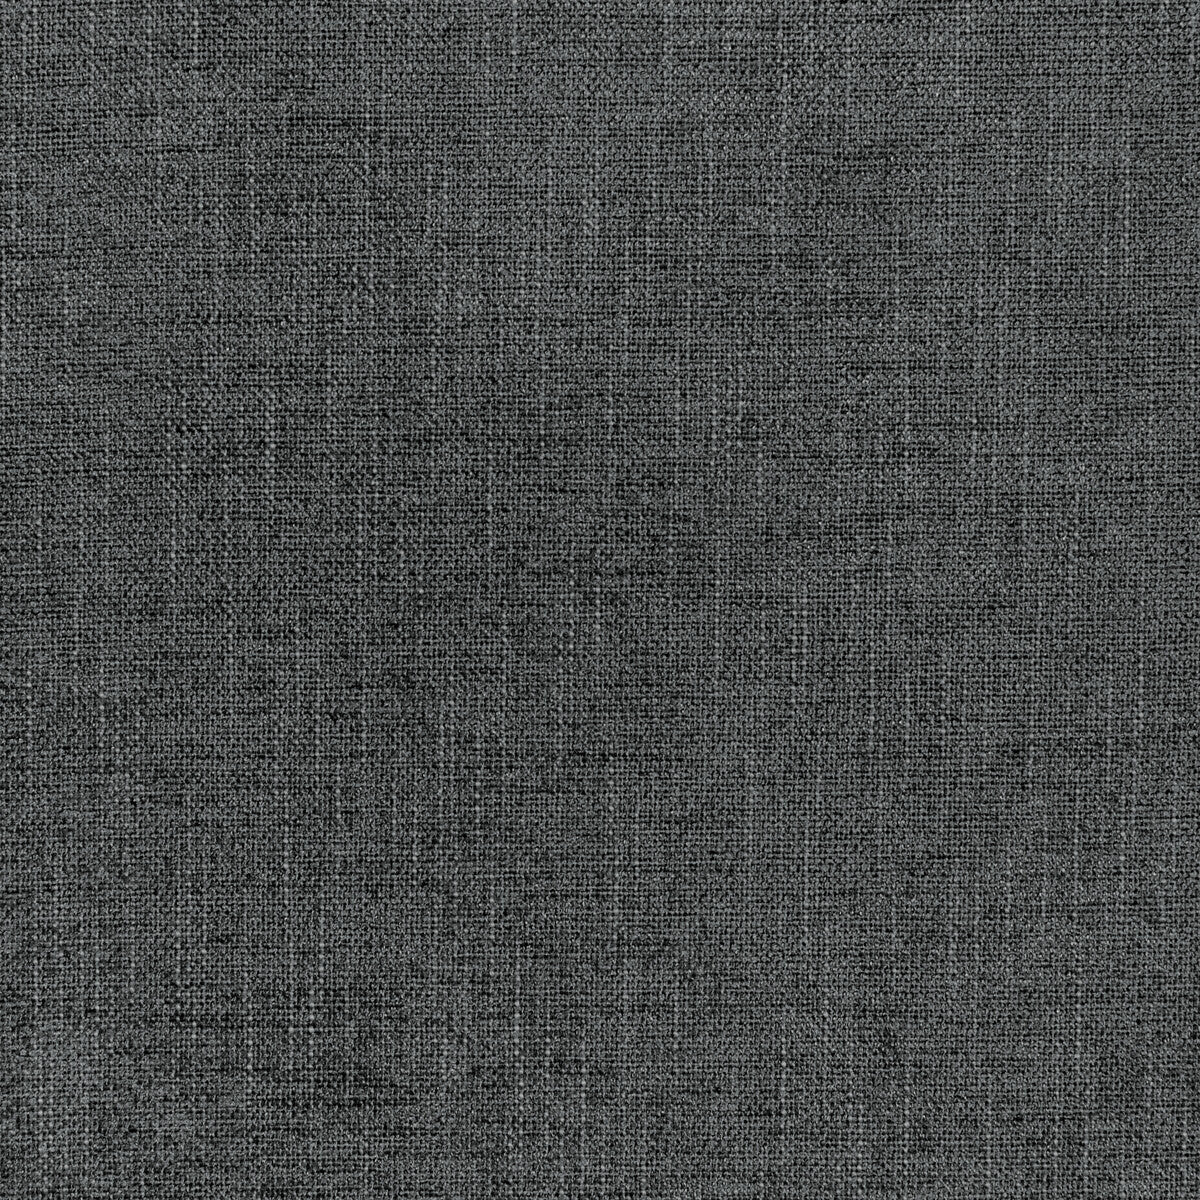 Kravet Smart fabric in 35973-21 color - pattern 35973.21.0 - by Kravet Smart in the Performance Crypton Home collection